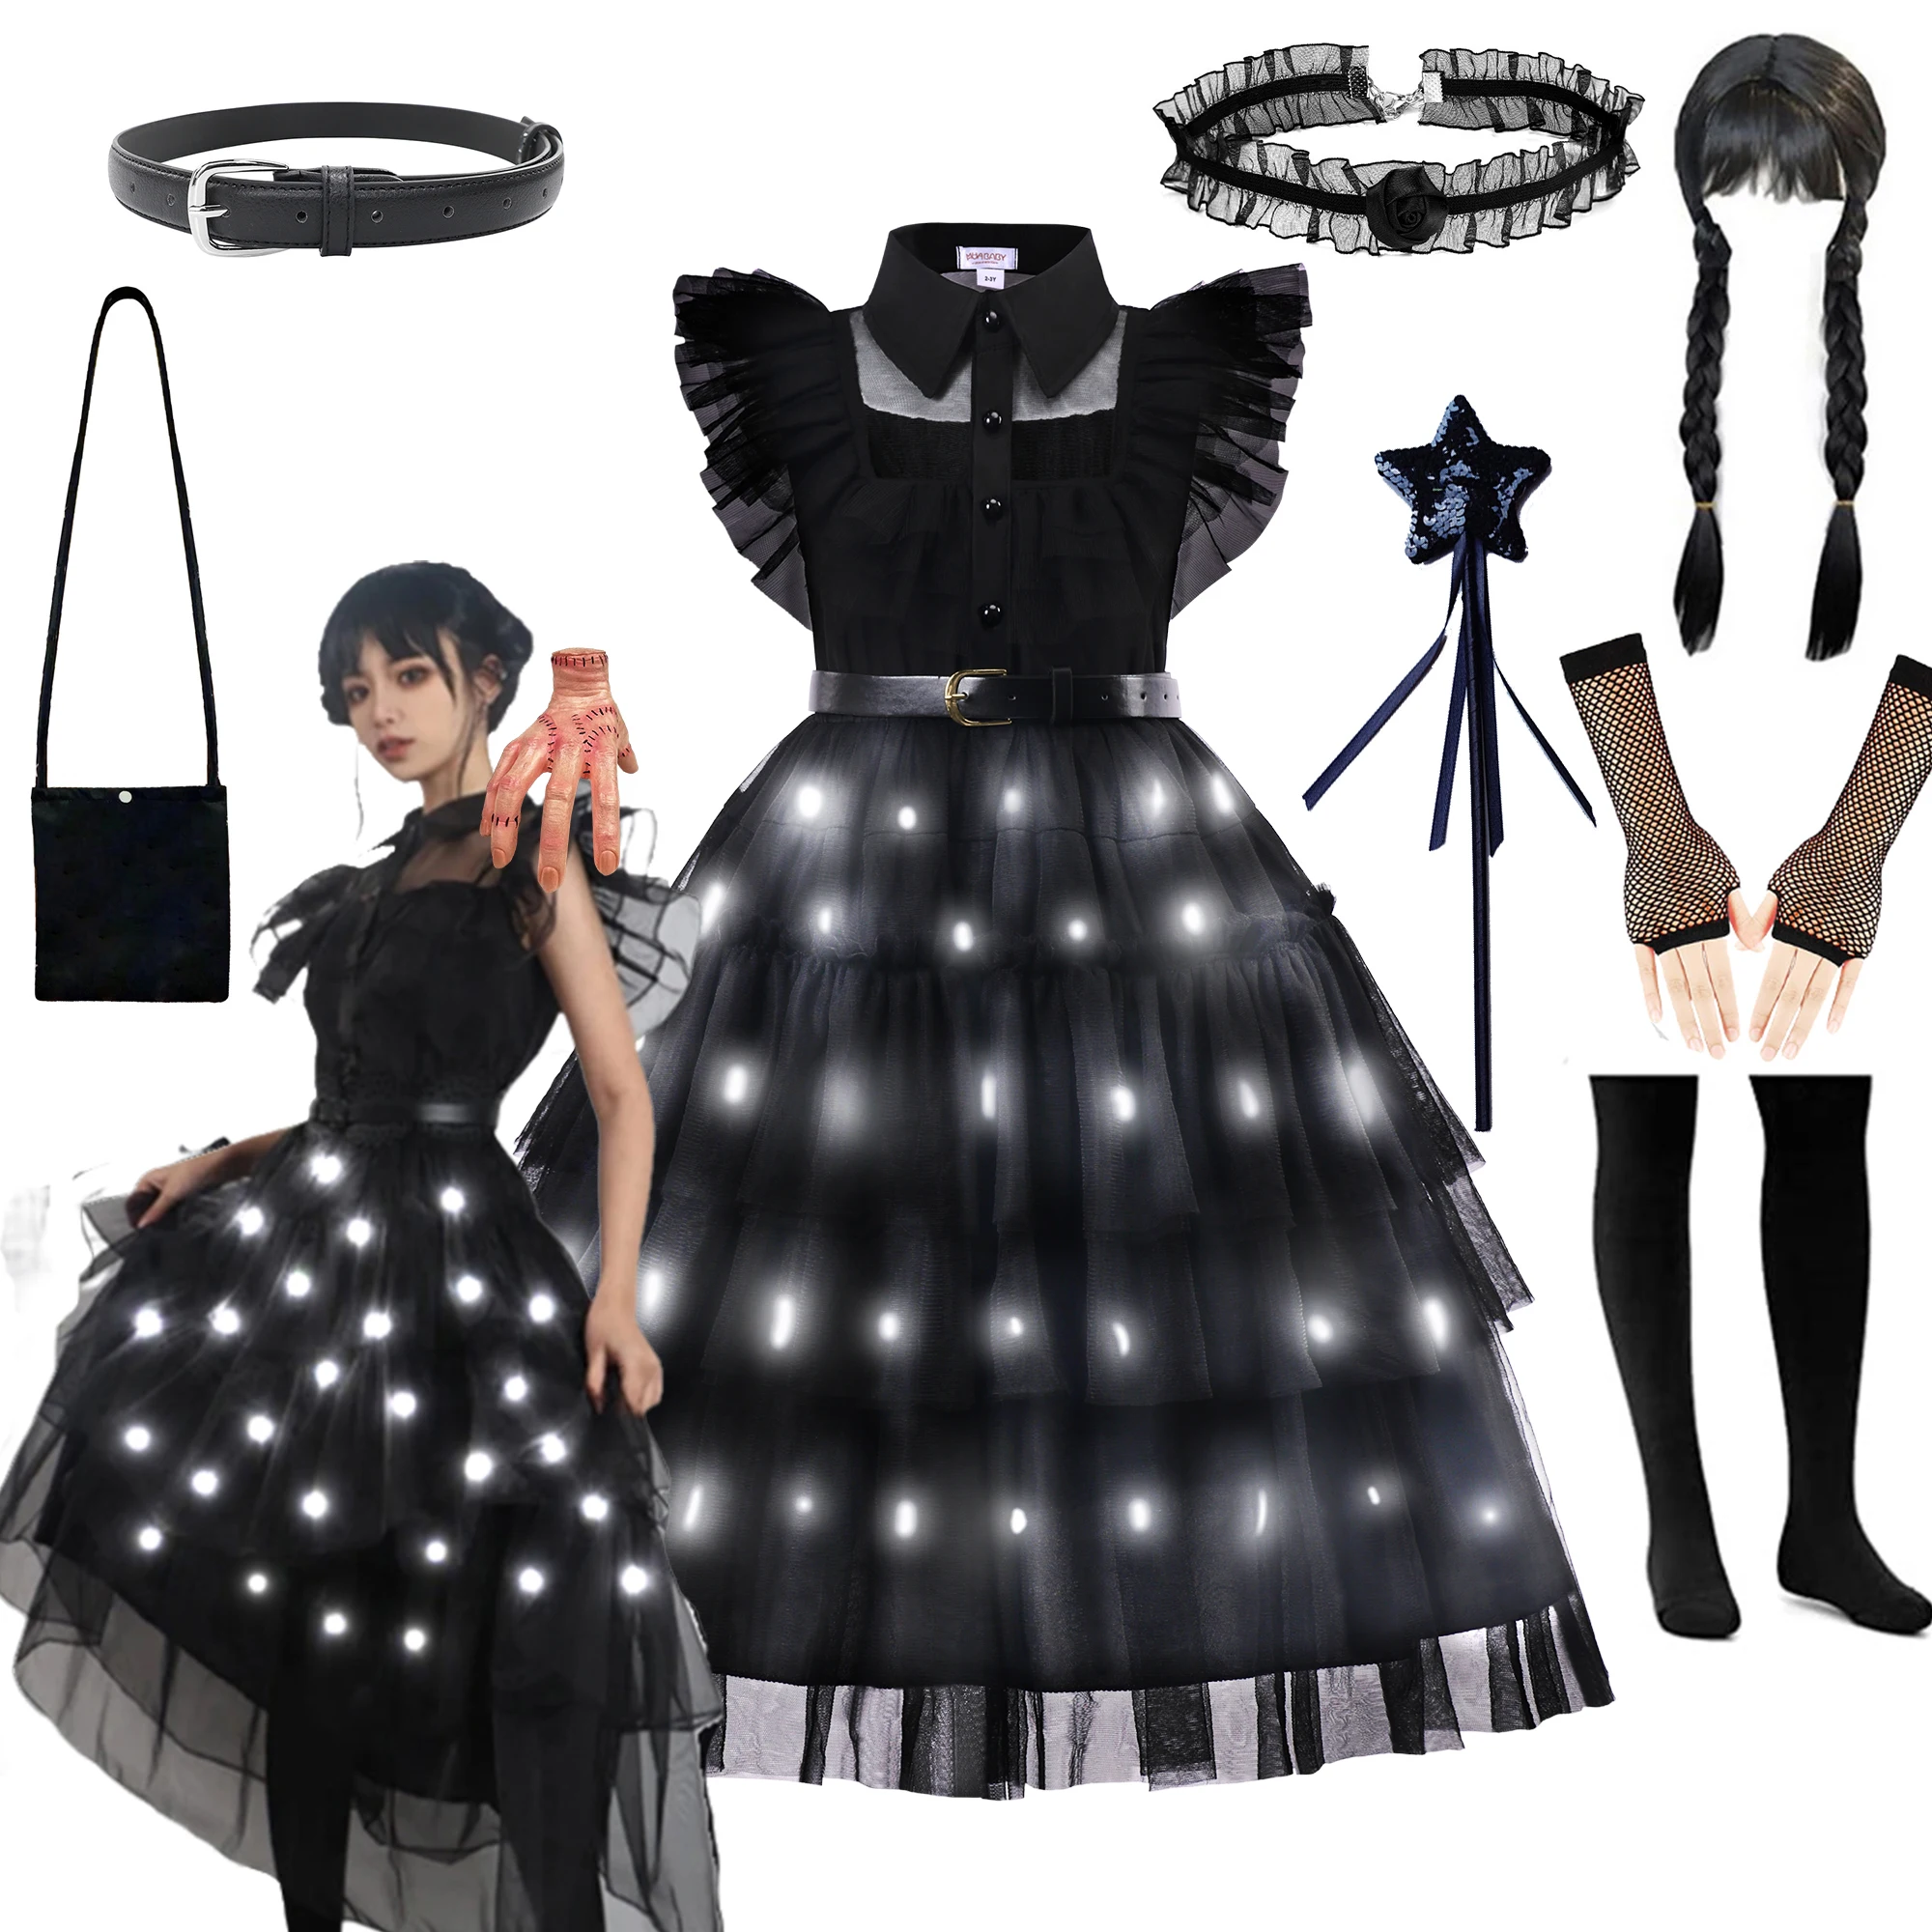 Wednesday Addams Led Light Up Clothes Girls Tulle Gown Carnival Halloween Costume Kids Party Disguise Princess Elegant Outfits